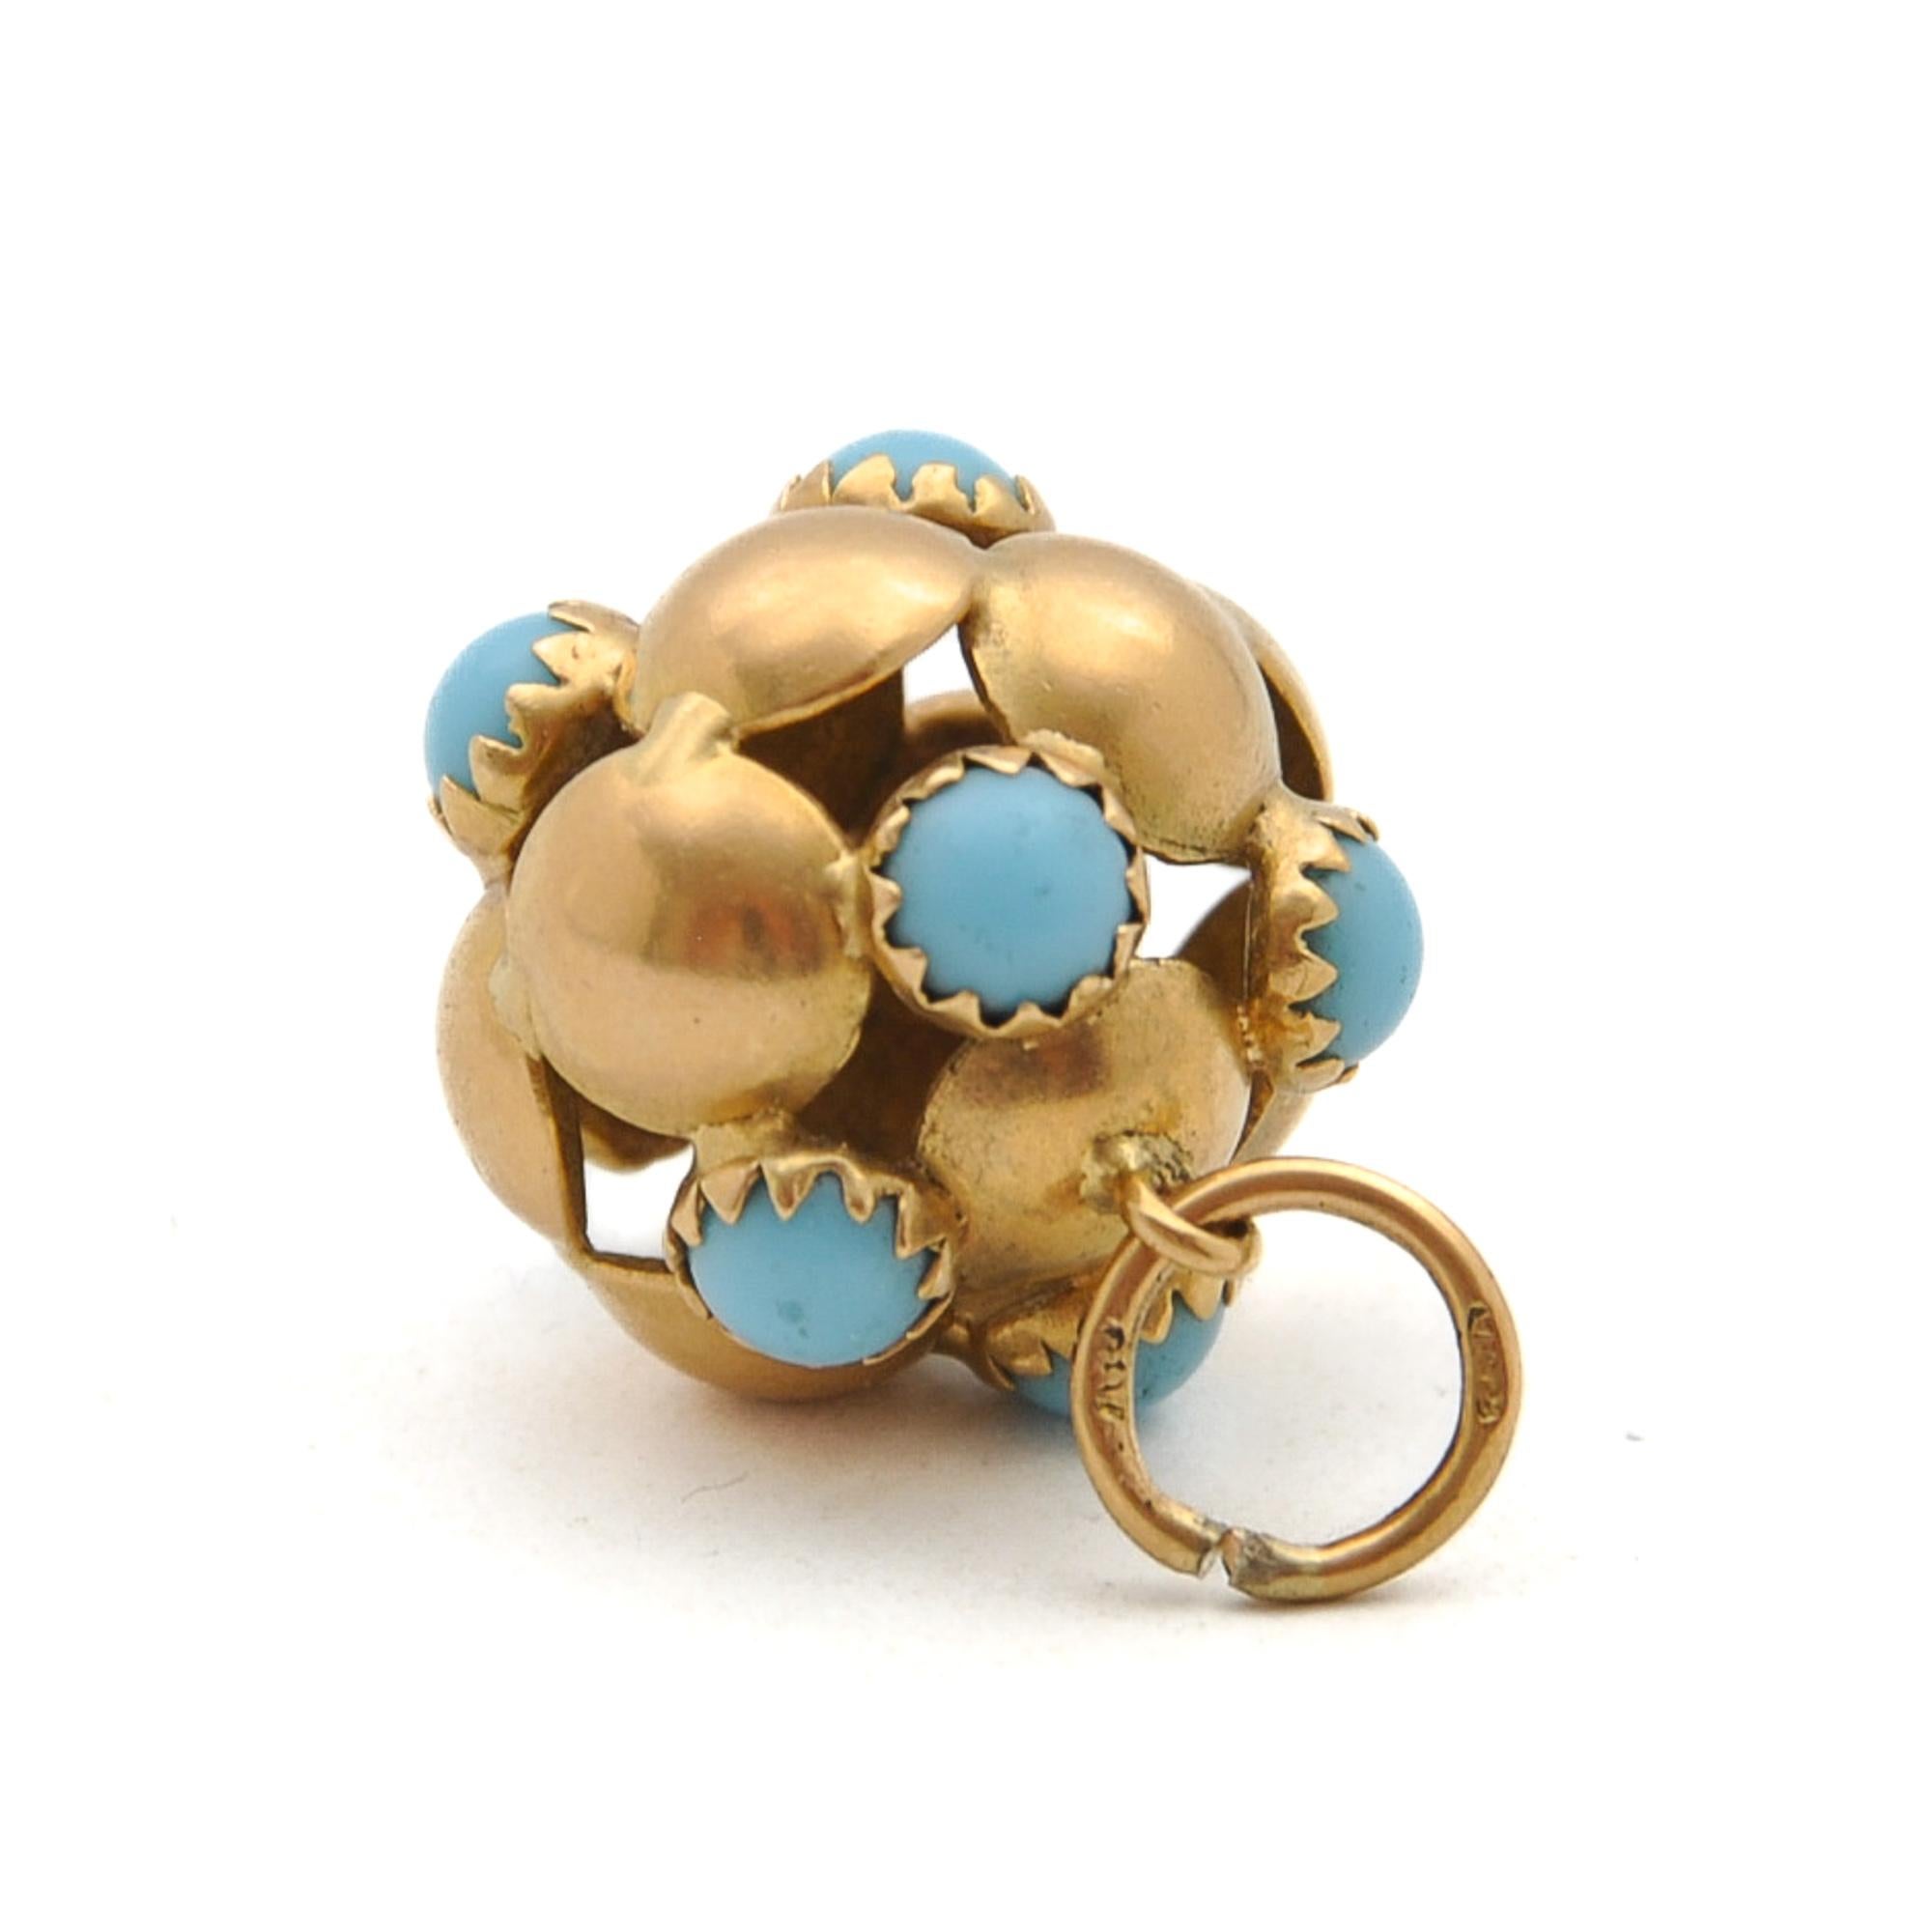 Vintage 18K Gold and Turquoise Ball Charm Pendant For Sale 4